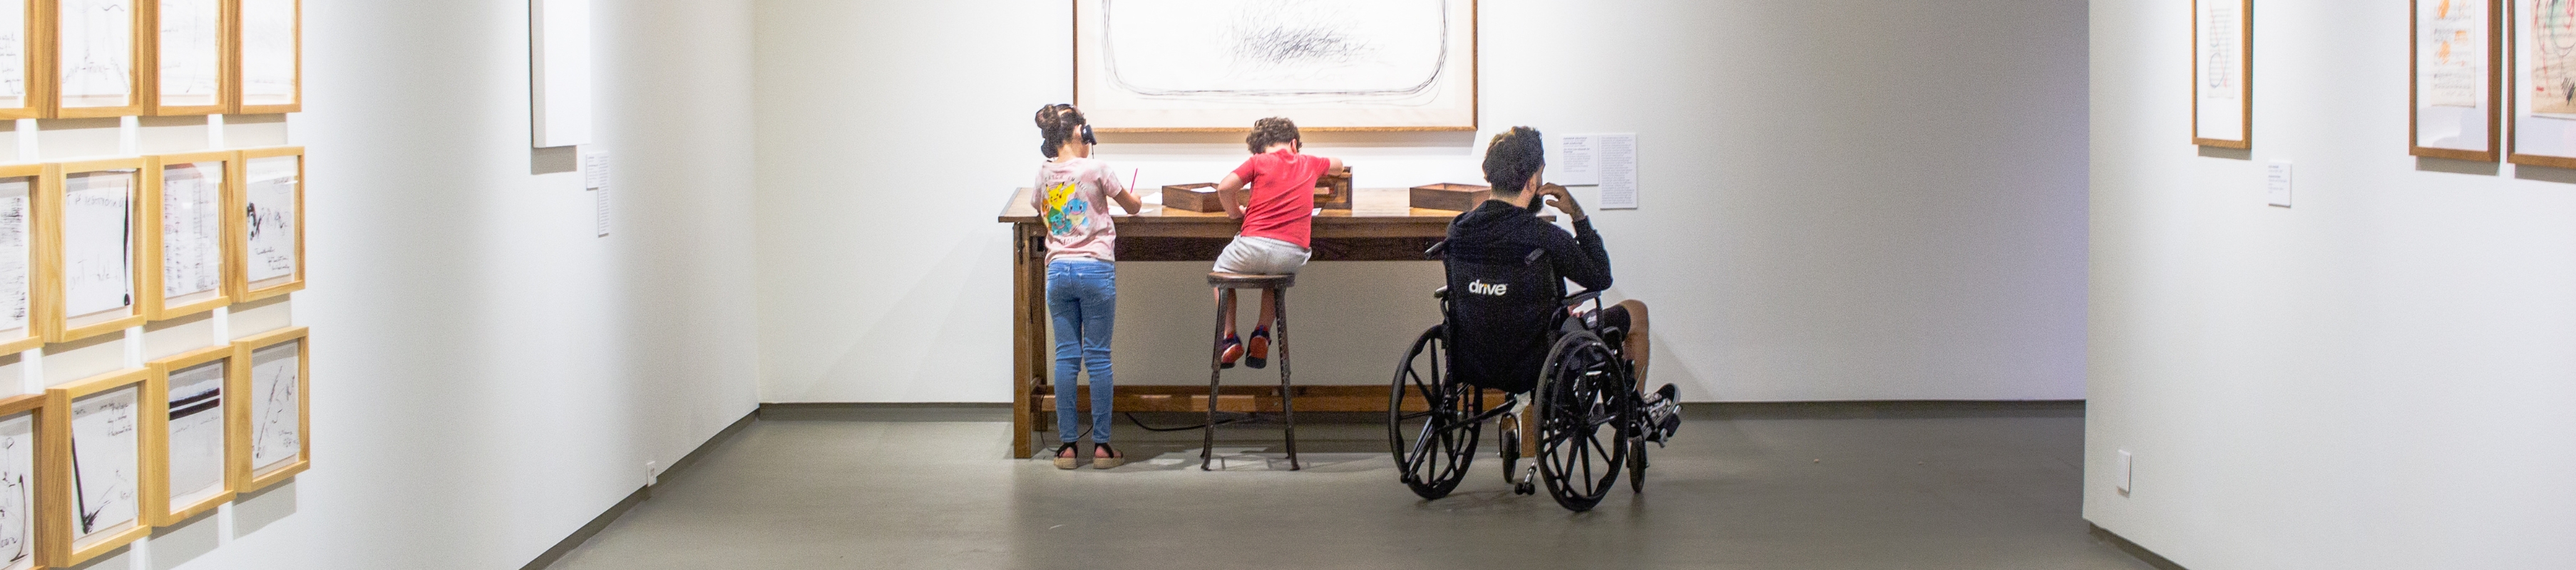 two children and a man in a wheelchair engaging in an interactive art piece at a table